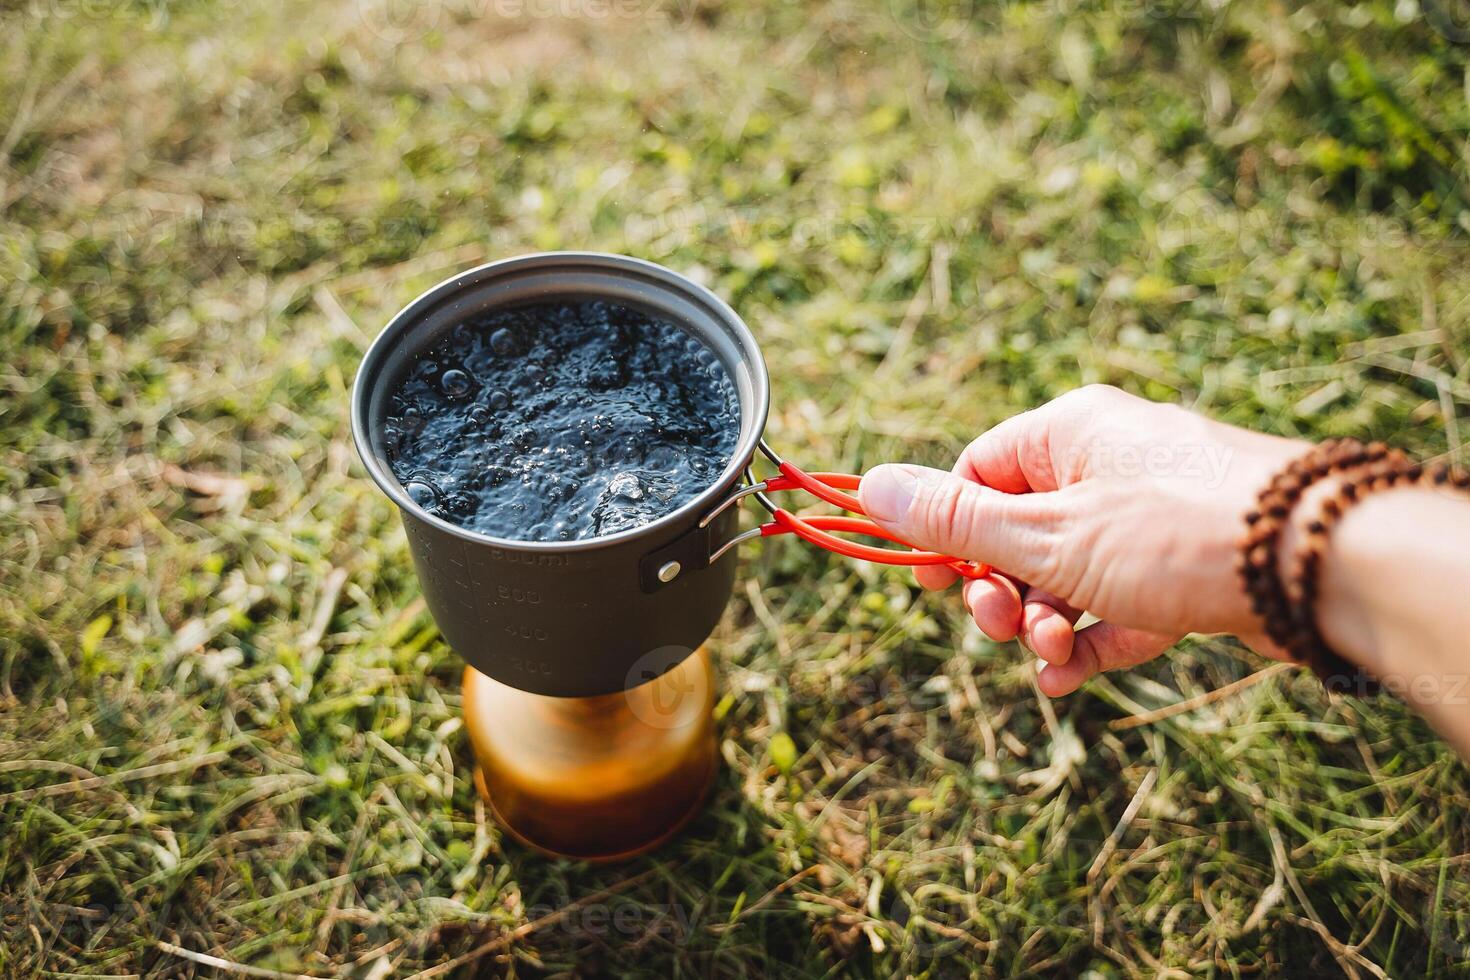 Hand holds a pot of hot water, a tourist cooks food on a hike on a gas burner, tourist utensils, camping in the forest, boil water for tea. photo